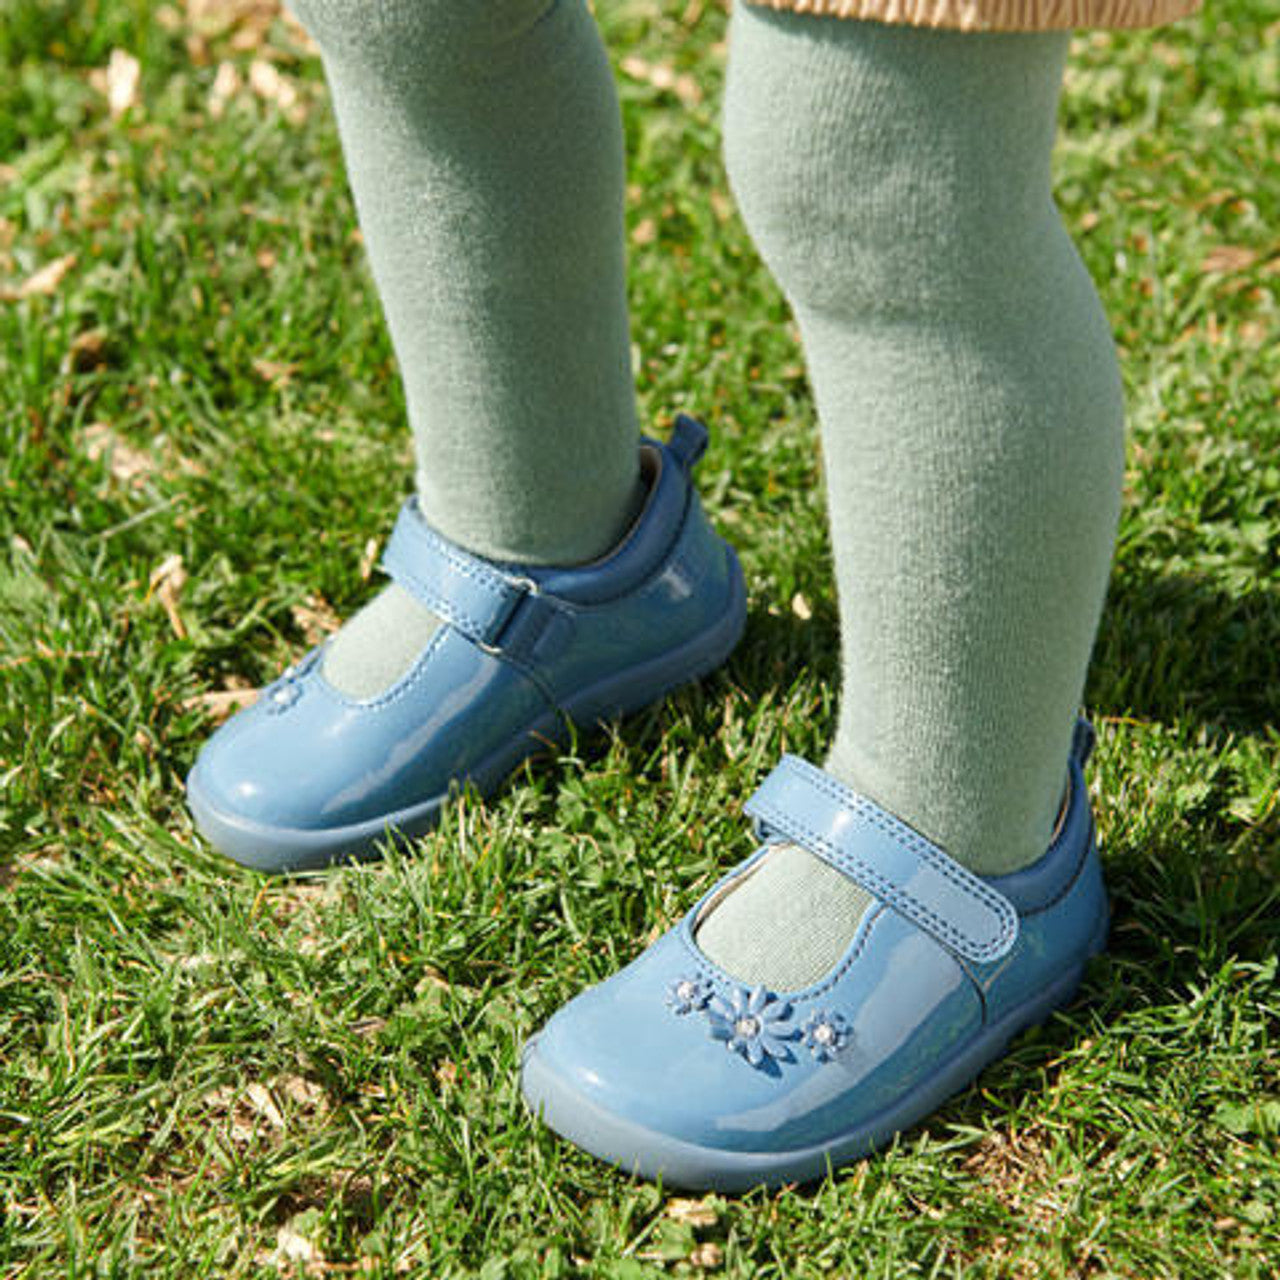 A child wearing a pair of girls Mary Jane shoes by Start Rite, style Fairy Tale, in pale blue patent with velcro fastening.